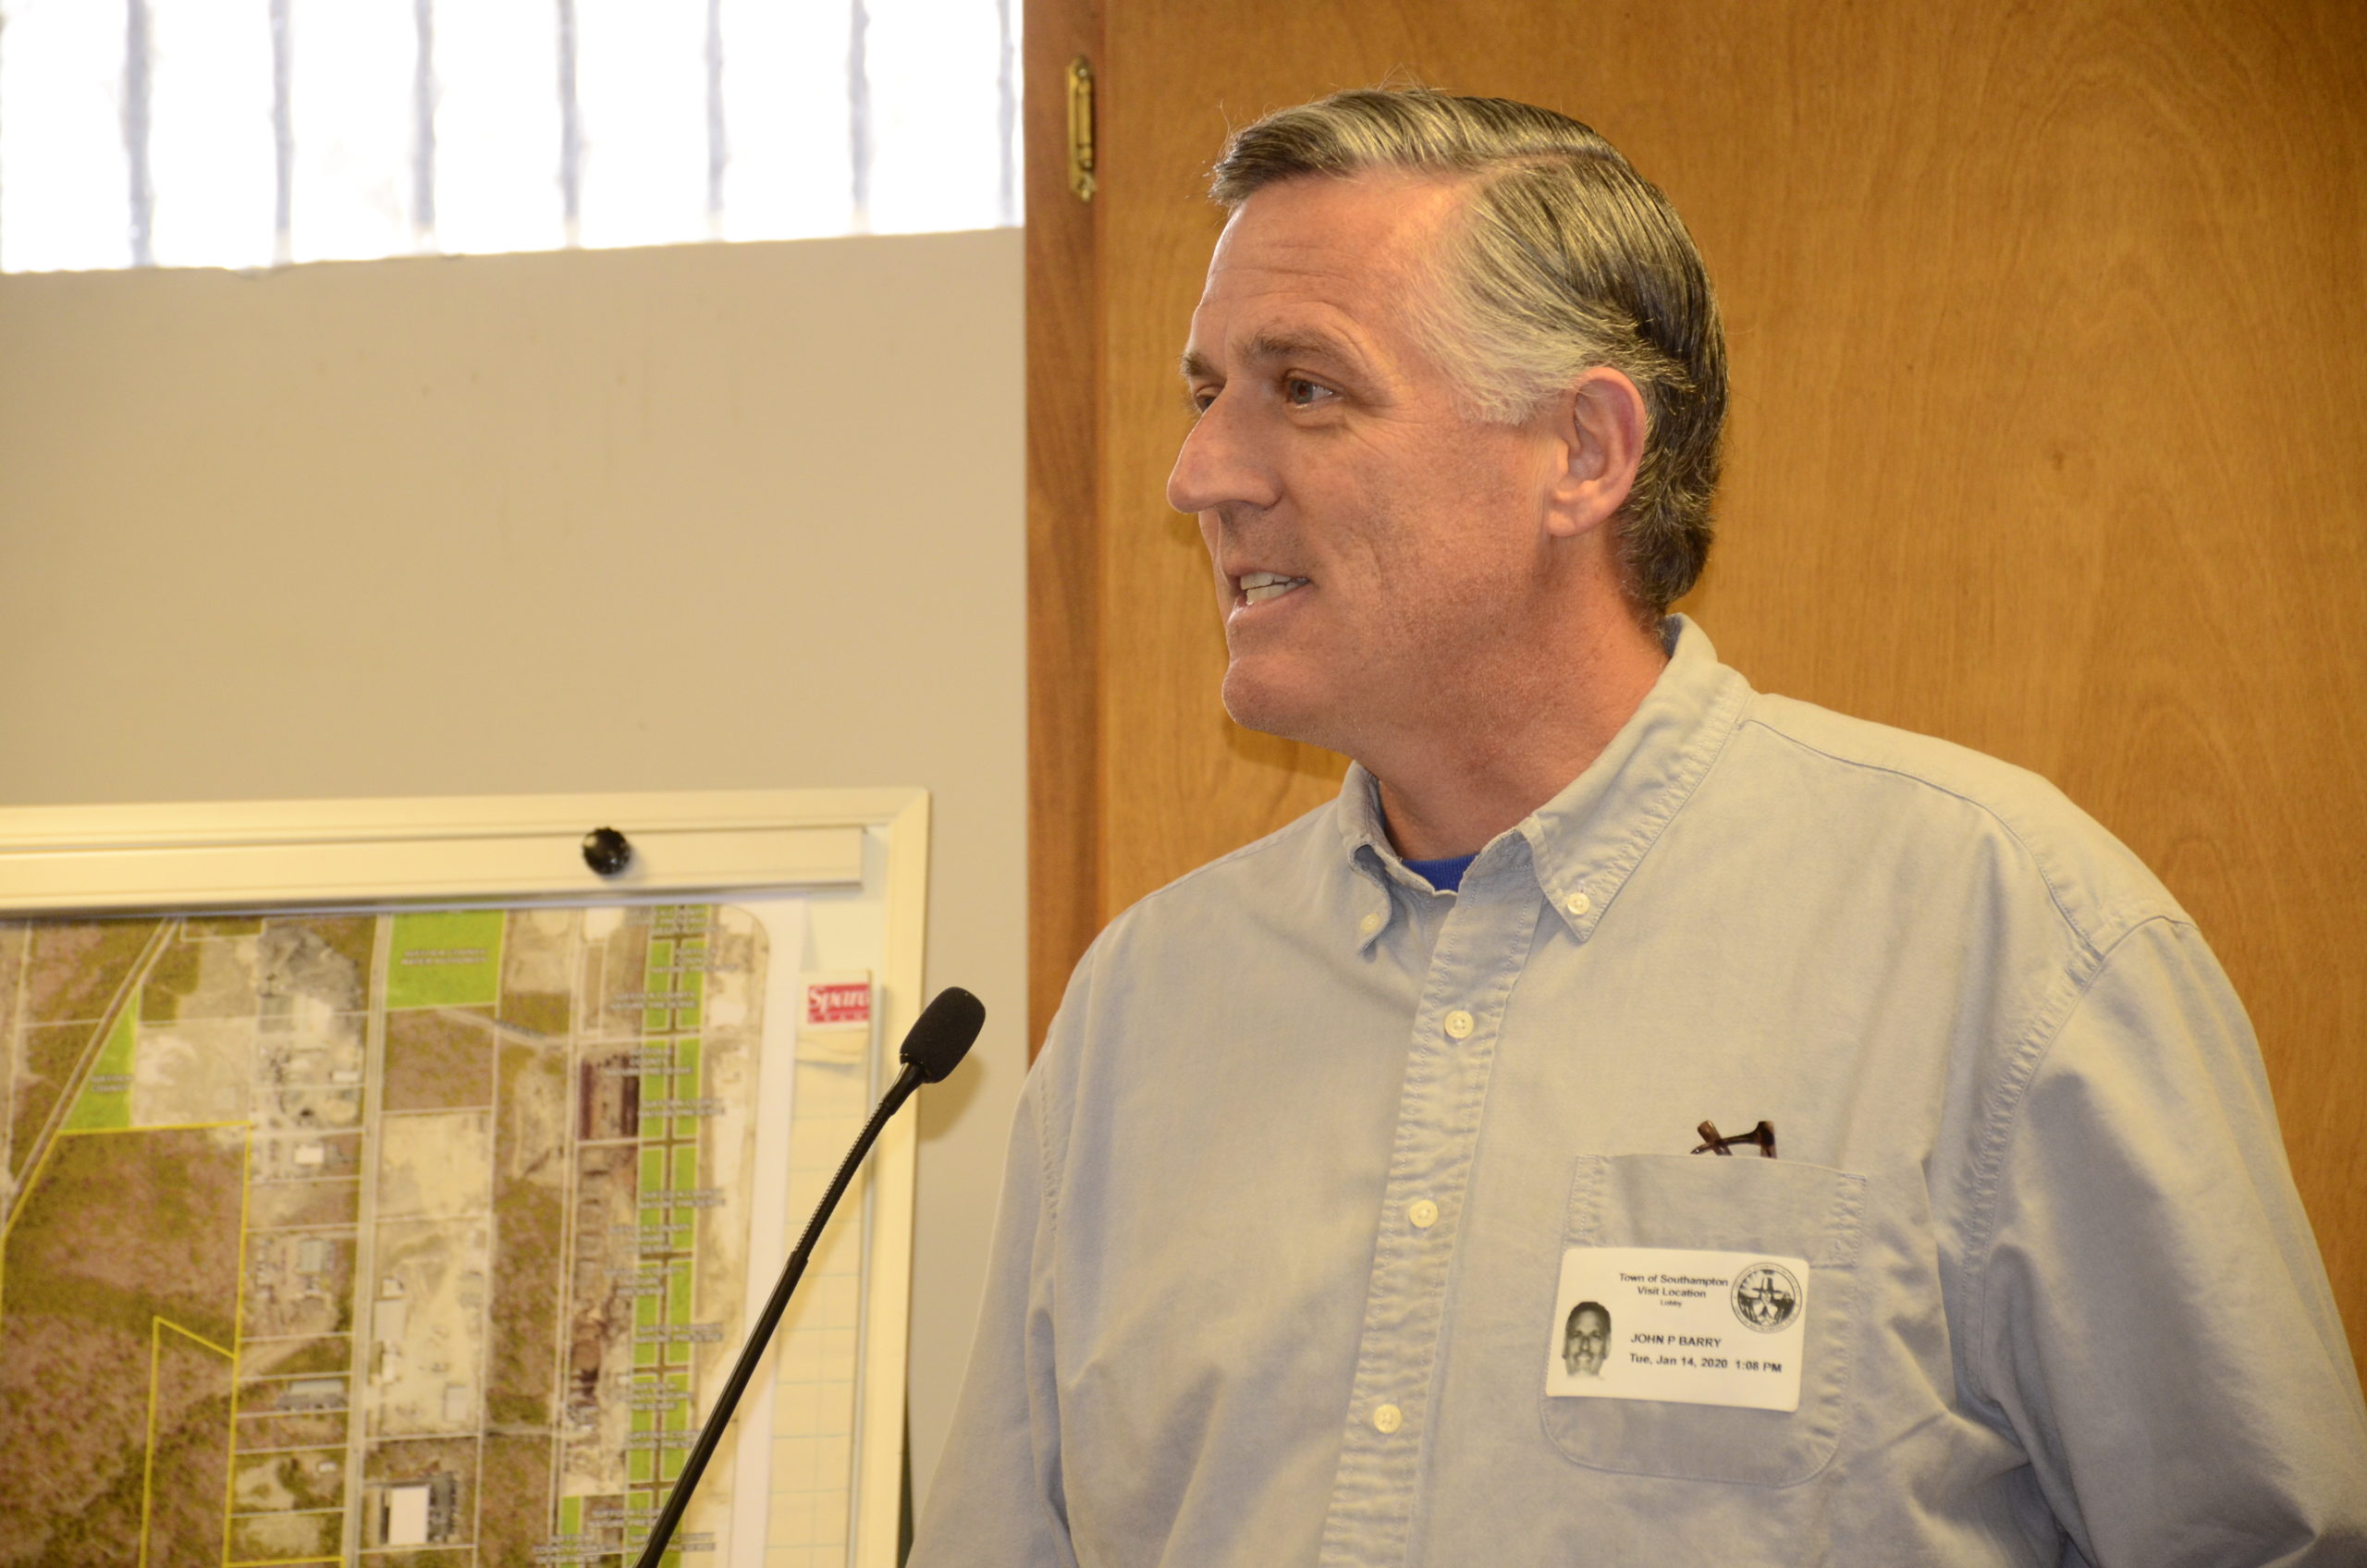 John Barry addressed the town board Tuesday afternoon regarding the 160-acre land parcel in Speonk being considered for CPF.